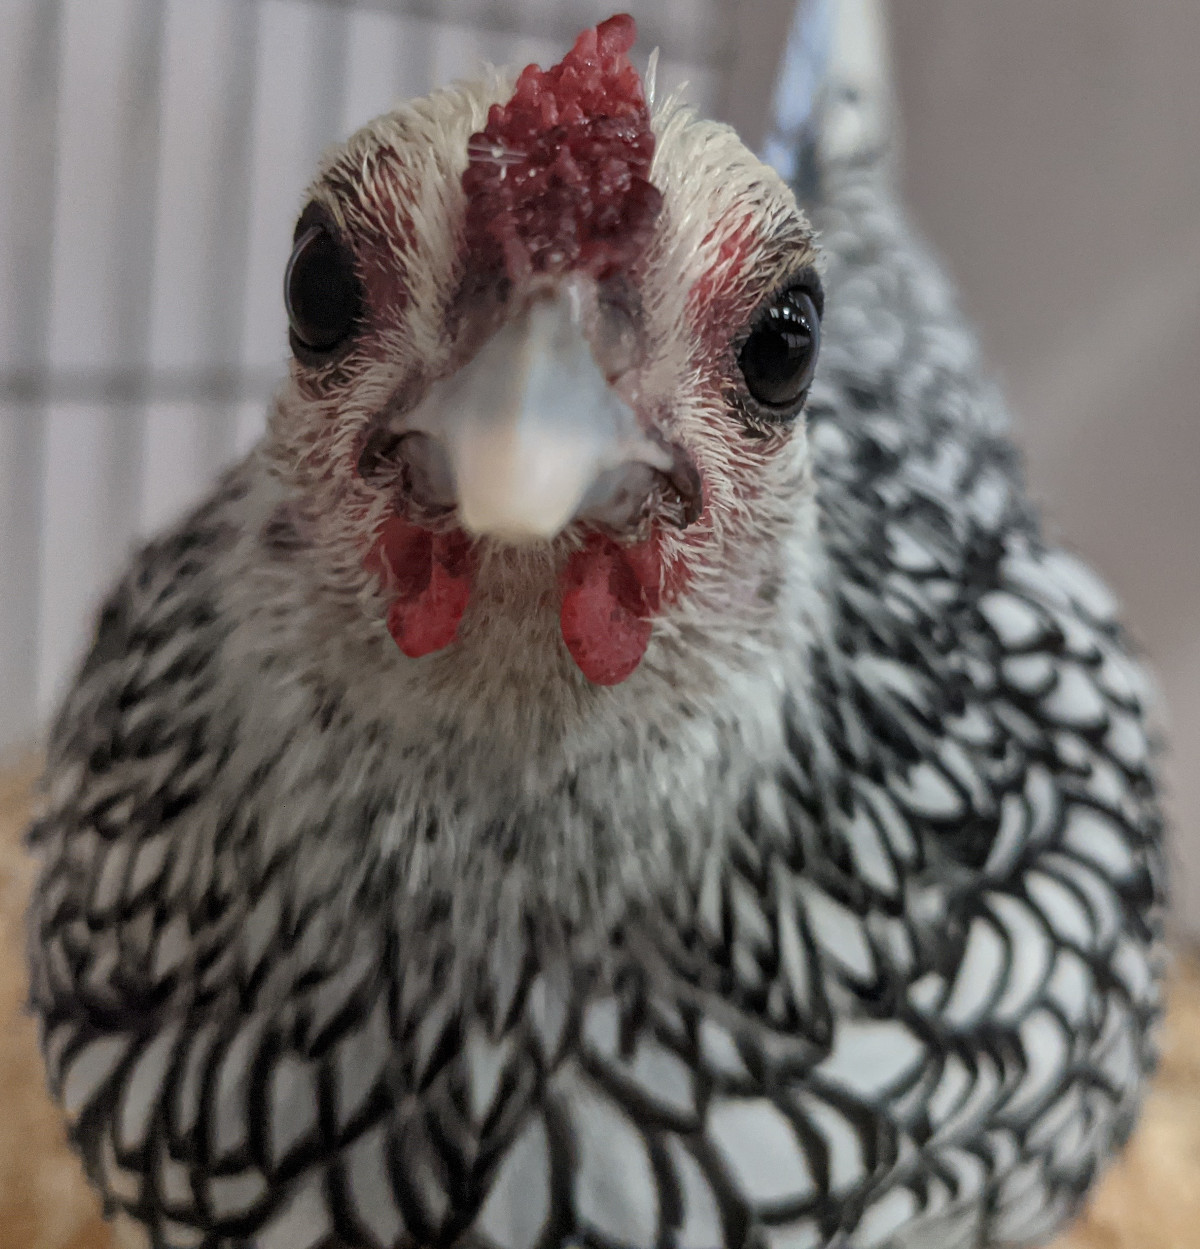 My chickens are all considered to be pets.